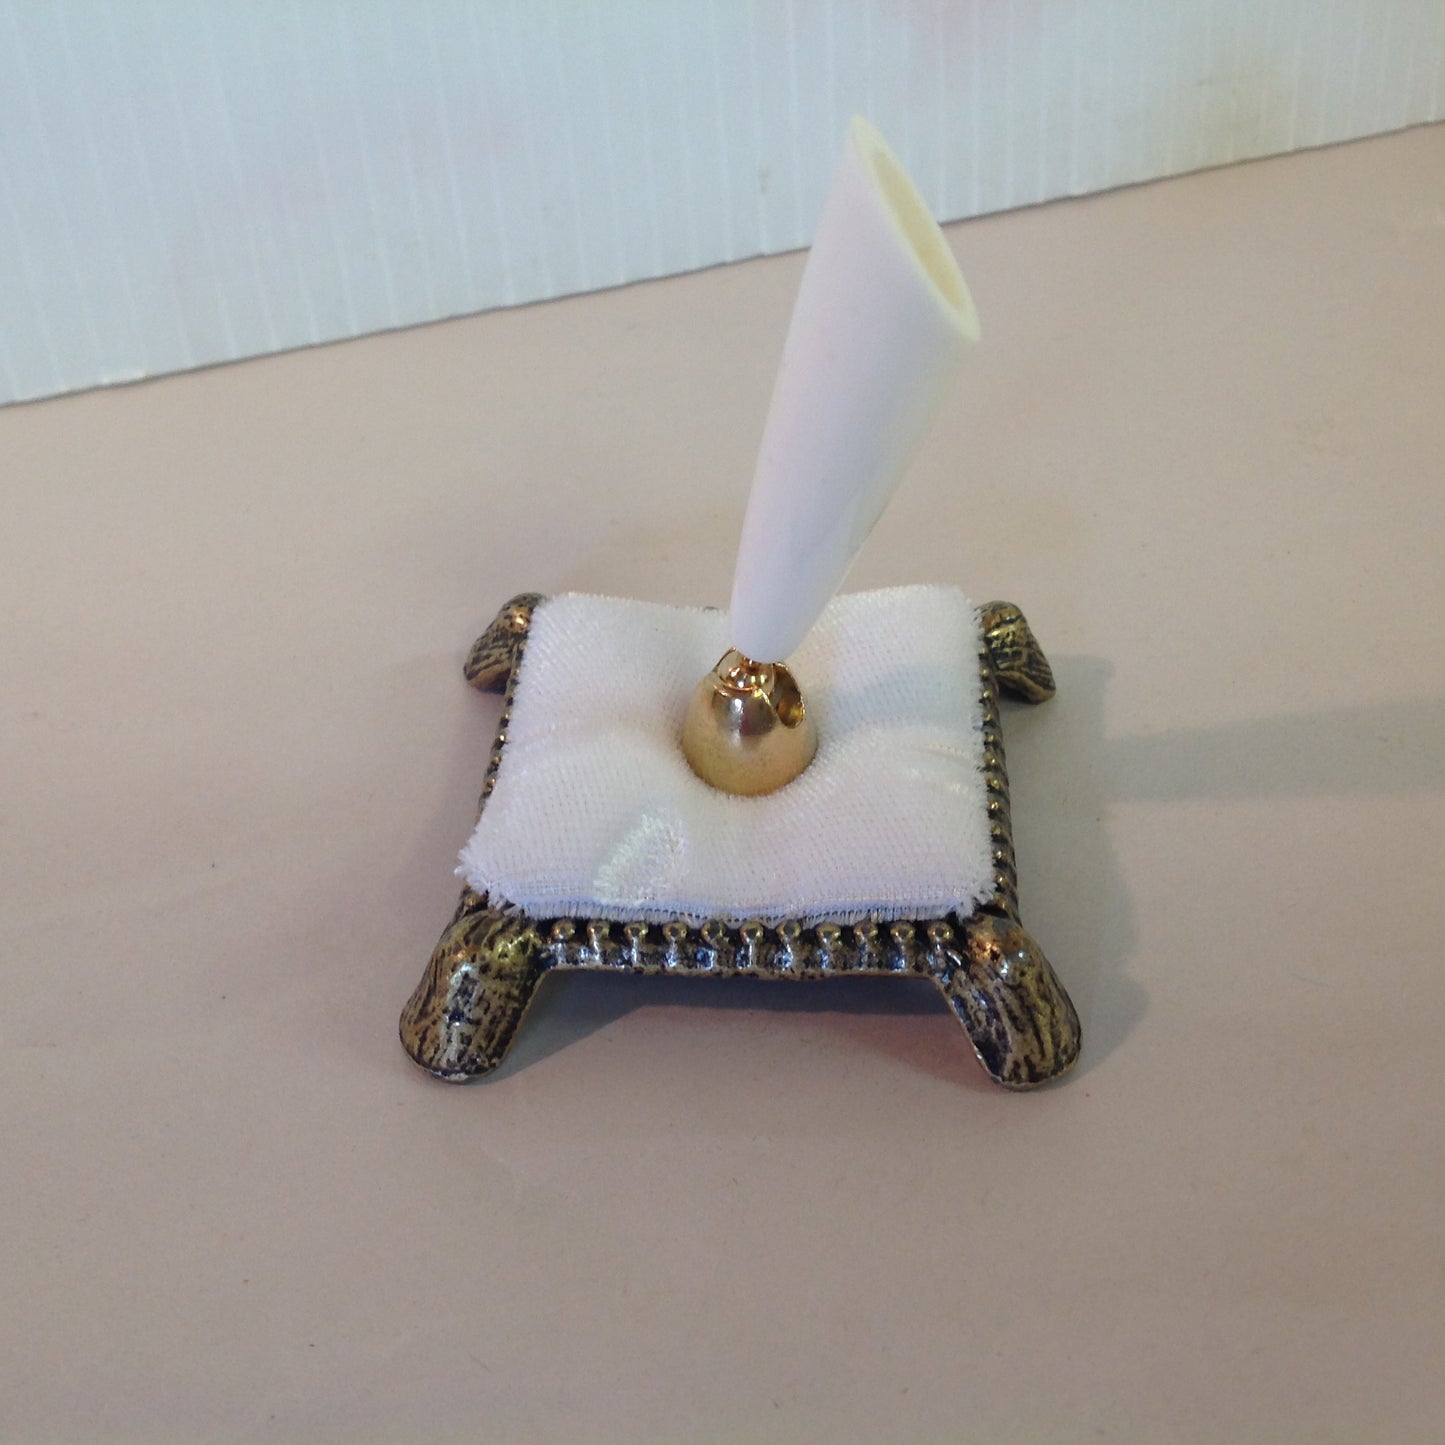 Vintage Hortense B Hewitt Elegant Accessories White Quill Pen Set with Fabric and Brass Footed Base Wedding Guest Book